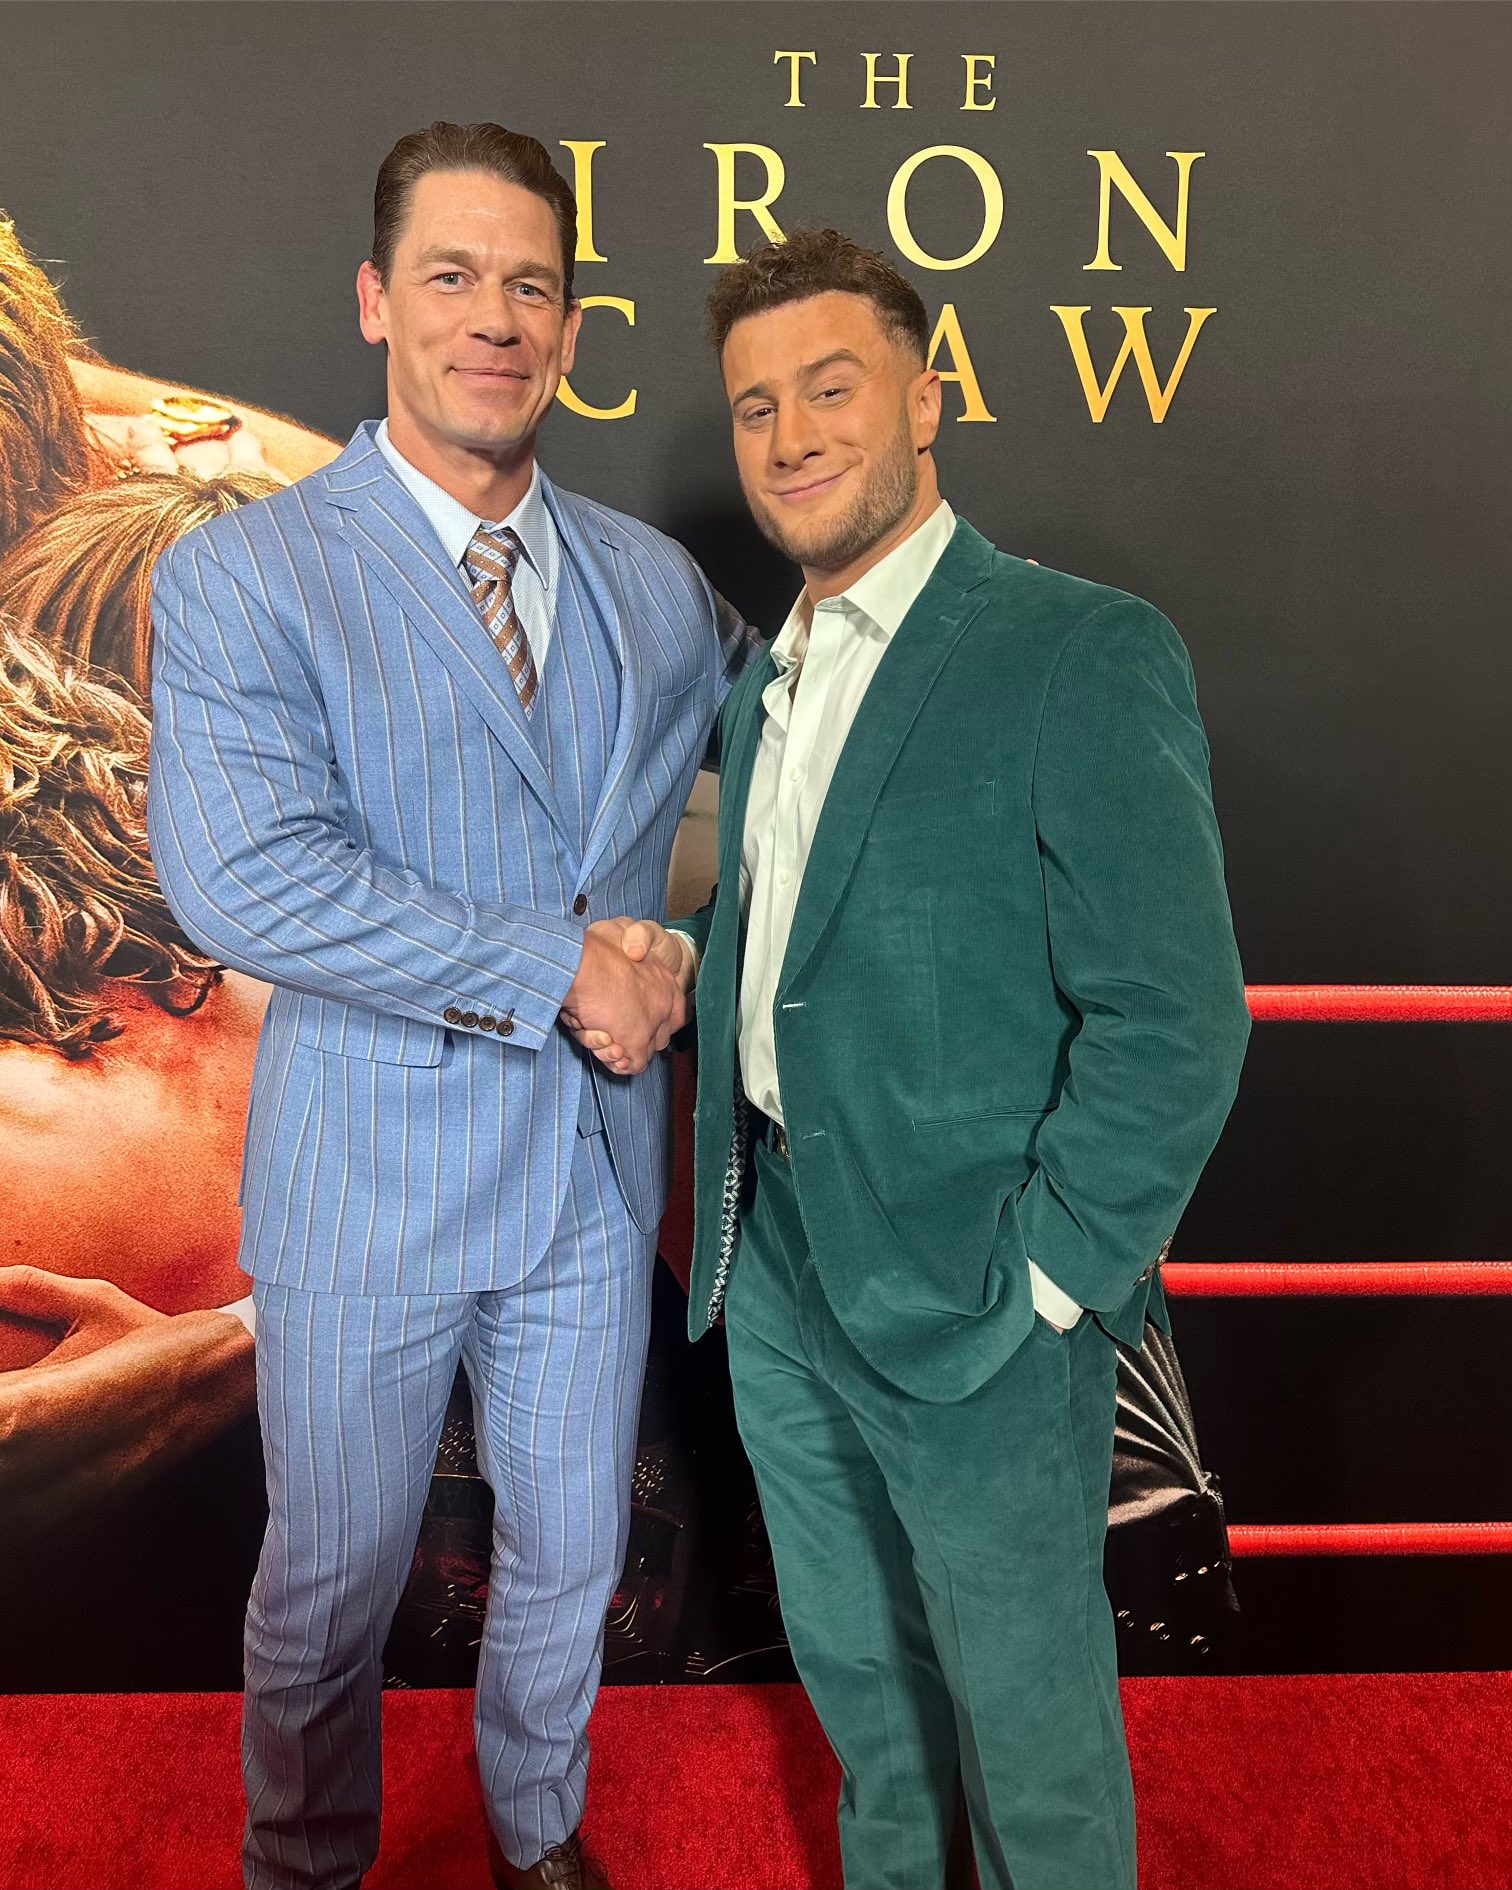 John Cena and MJF at a Los Angeles screening of The Iron Claw. Twitter photo